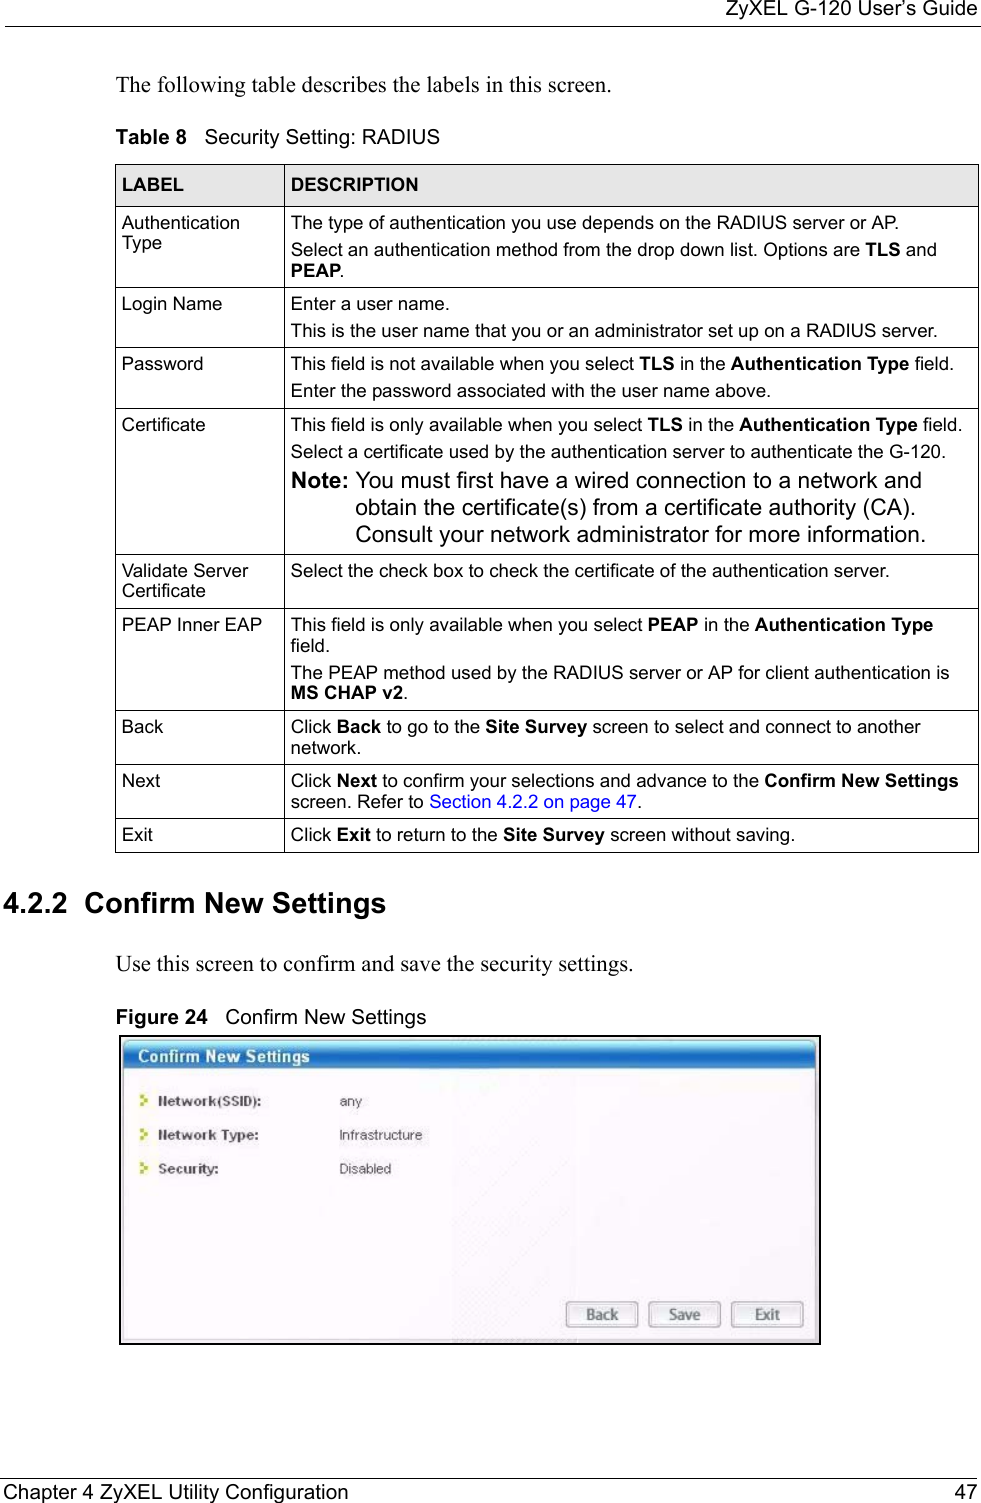 ZyXEL G-120 User’s GuideChapter 4 ZyXEL Utility Configuration 47The following table describes the labels in this screen.  4.2.2  Confirm New SettingsUse this screen to confirm and save the security settings.Figure 24   Confirm New Settings Table 8   Security Setting: RADIUSLABEL DESCRIPTIONAuthentication TypeThe type of authentication you use depends on the RADIUS server or AP.Select an authentication method from the drop down list. Options are TLS and PEAP.Login Name Enter a user name. This is the user name that you or an administrator set up on a RADIUS server.Password This field is not available when you select TLS in the Authentication Type field. Enter the password associated with the user name above. Certificate This field is only available when you select TLS in the Authentication Type field. Select a certificate used by the authentication server to authenticate the G-120.Note: You must first have a wired connection to a network and obtain the certificate(s) from a certificate authority (CA). Consult your network administrator for more information.Validate Server CertificateSelect the check box to check the certificate of the authentication server.PEAP Inner EAP This field is only available when you select PEAP in the Authentication Type field.The PEAP method used by the RADIUS server or AP for client authentication is MS CHAP v2.Back Click Back to go to the Site Survey screen to select and connect to another network.Next Click Next to confirm your selections and advance to the Confirm New Settings screen. Refer to Section 4.2.2 on page 47. Exit Click Exit to return to the Site Survey screen without saving.